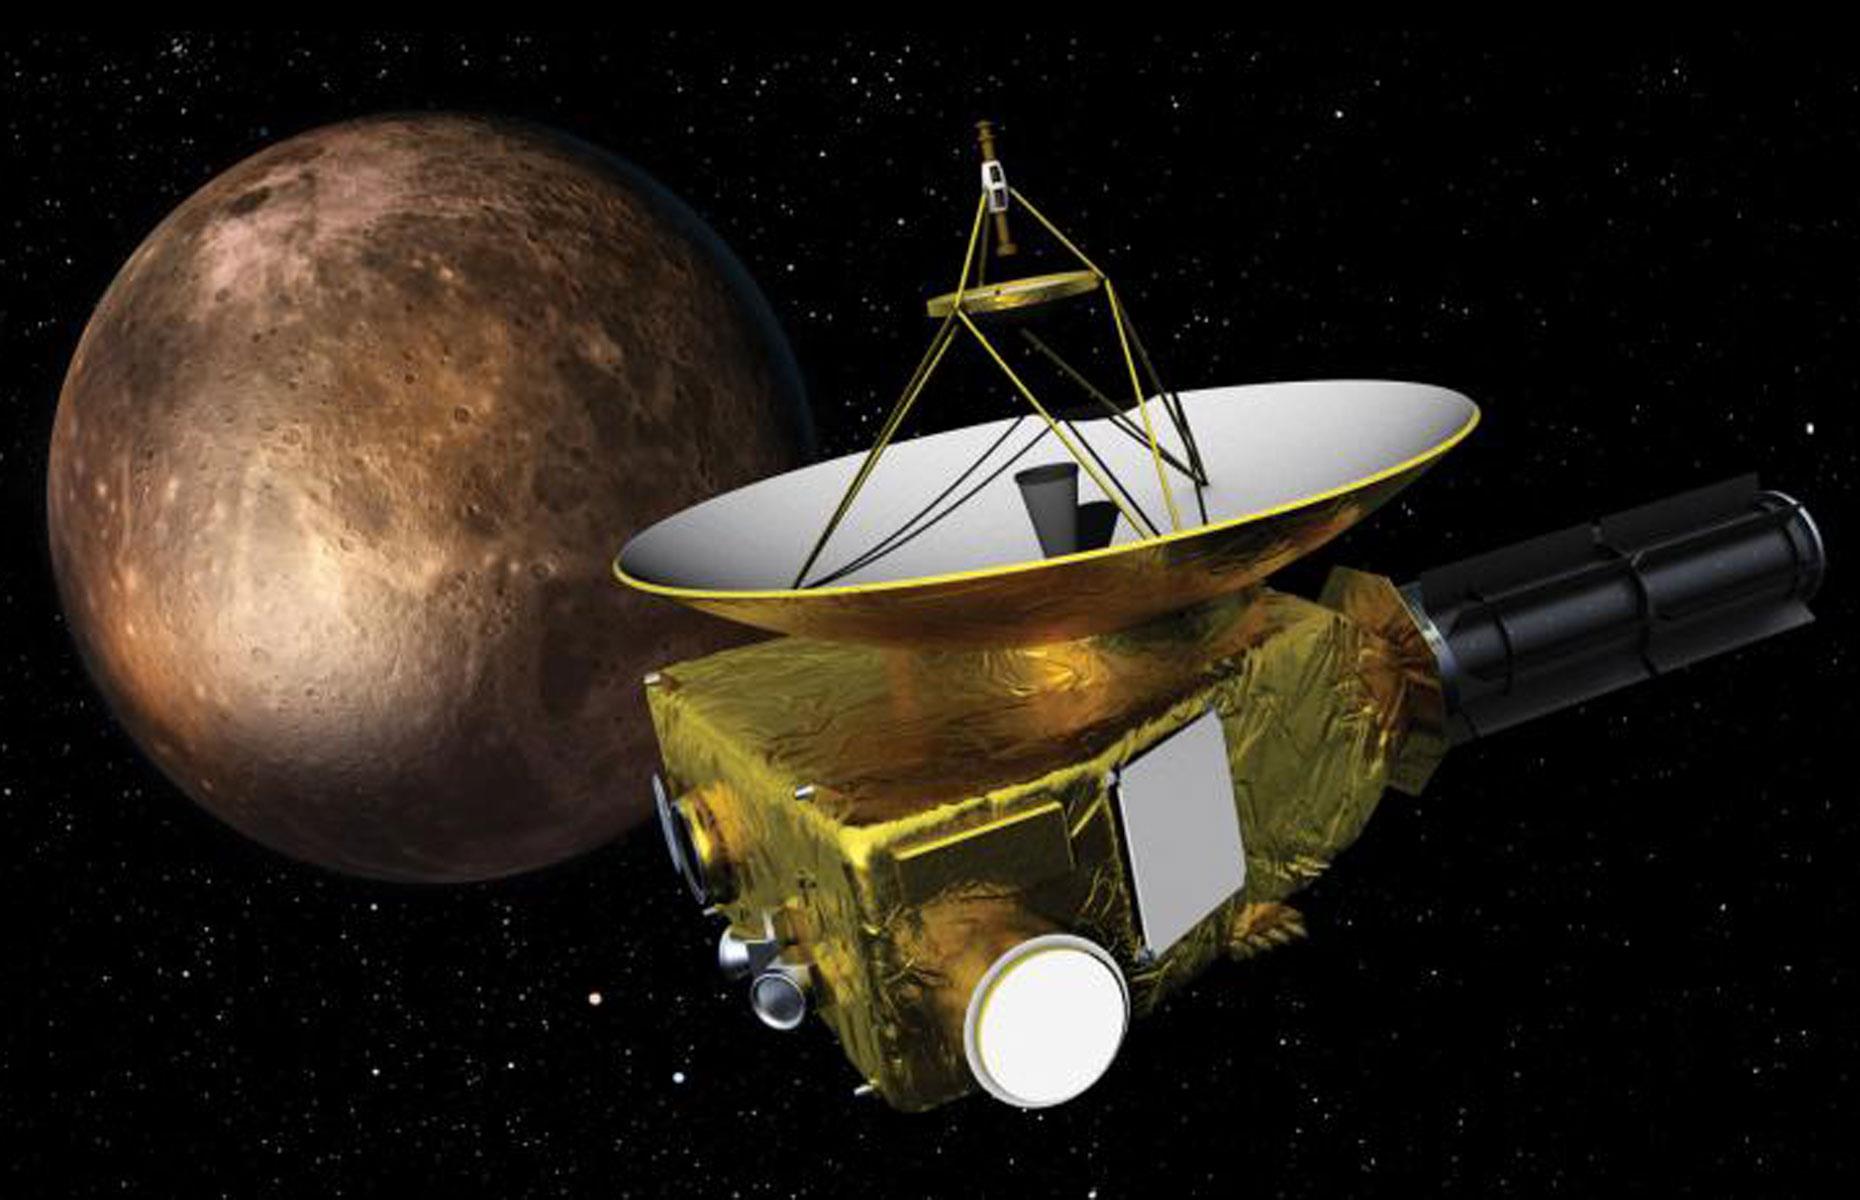 The fifth artificial object to make it past the Solar System, the New Horizons probe was launched by NASA in 2006 and is currently on its way to the Kuiper belt object, having passed Pluto. The craft's final destination is the constellation of Sagittarius, if it survives the unimaginably long journey.